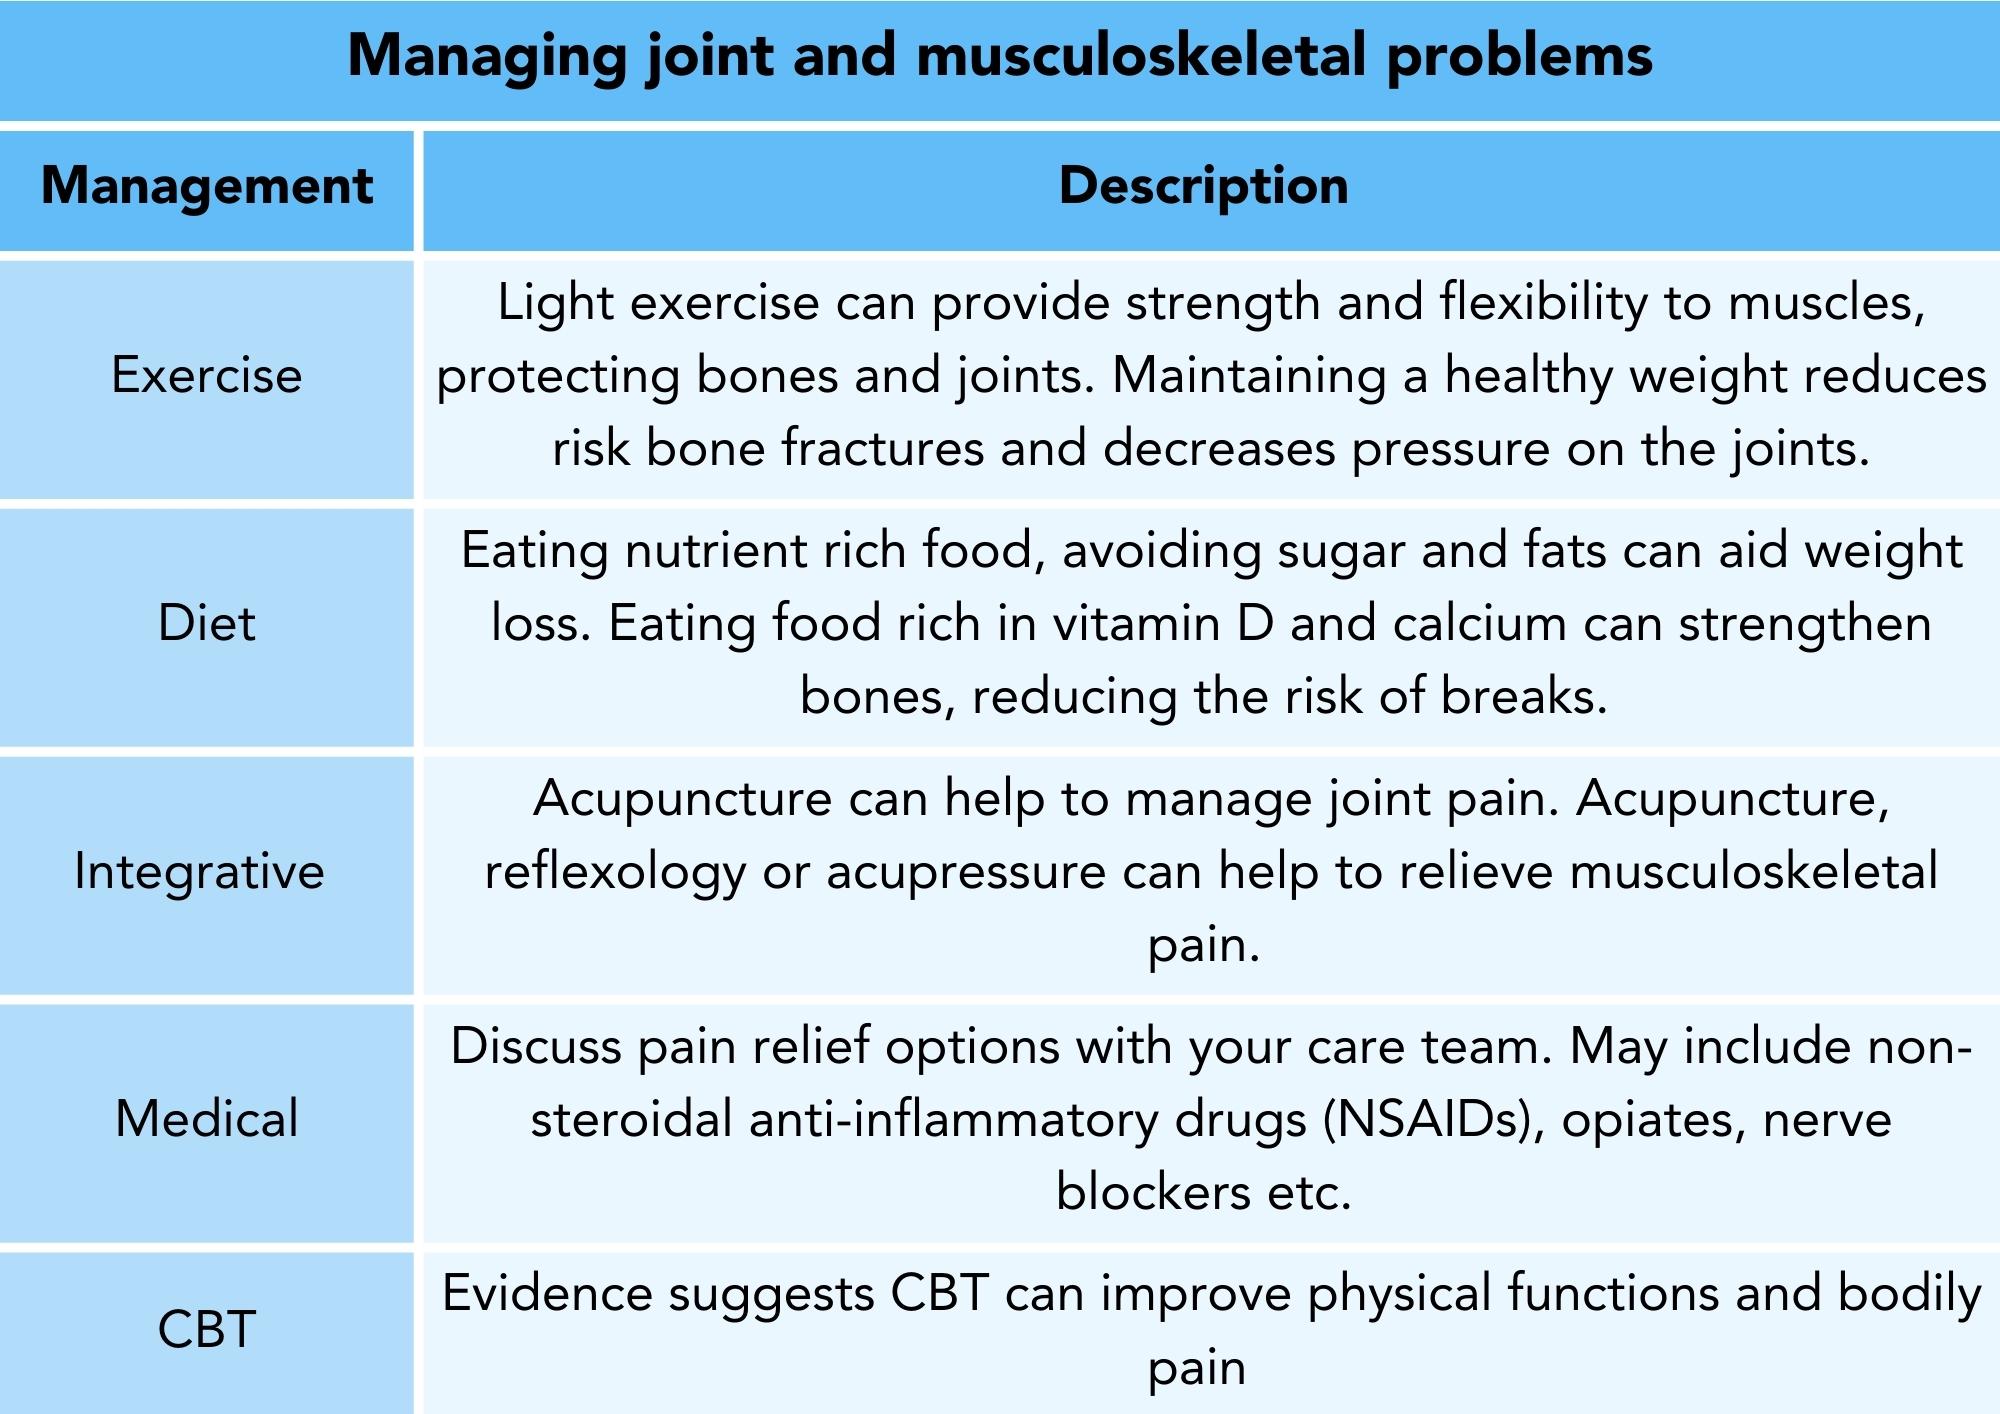 Techniques to manage joint and musculoskeletal problems caused by breast cancer treatment